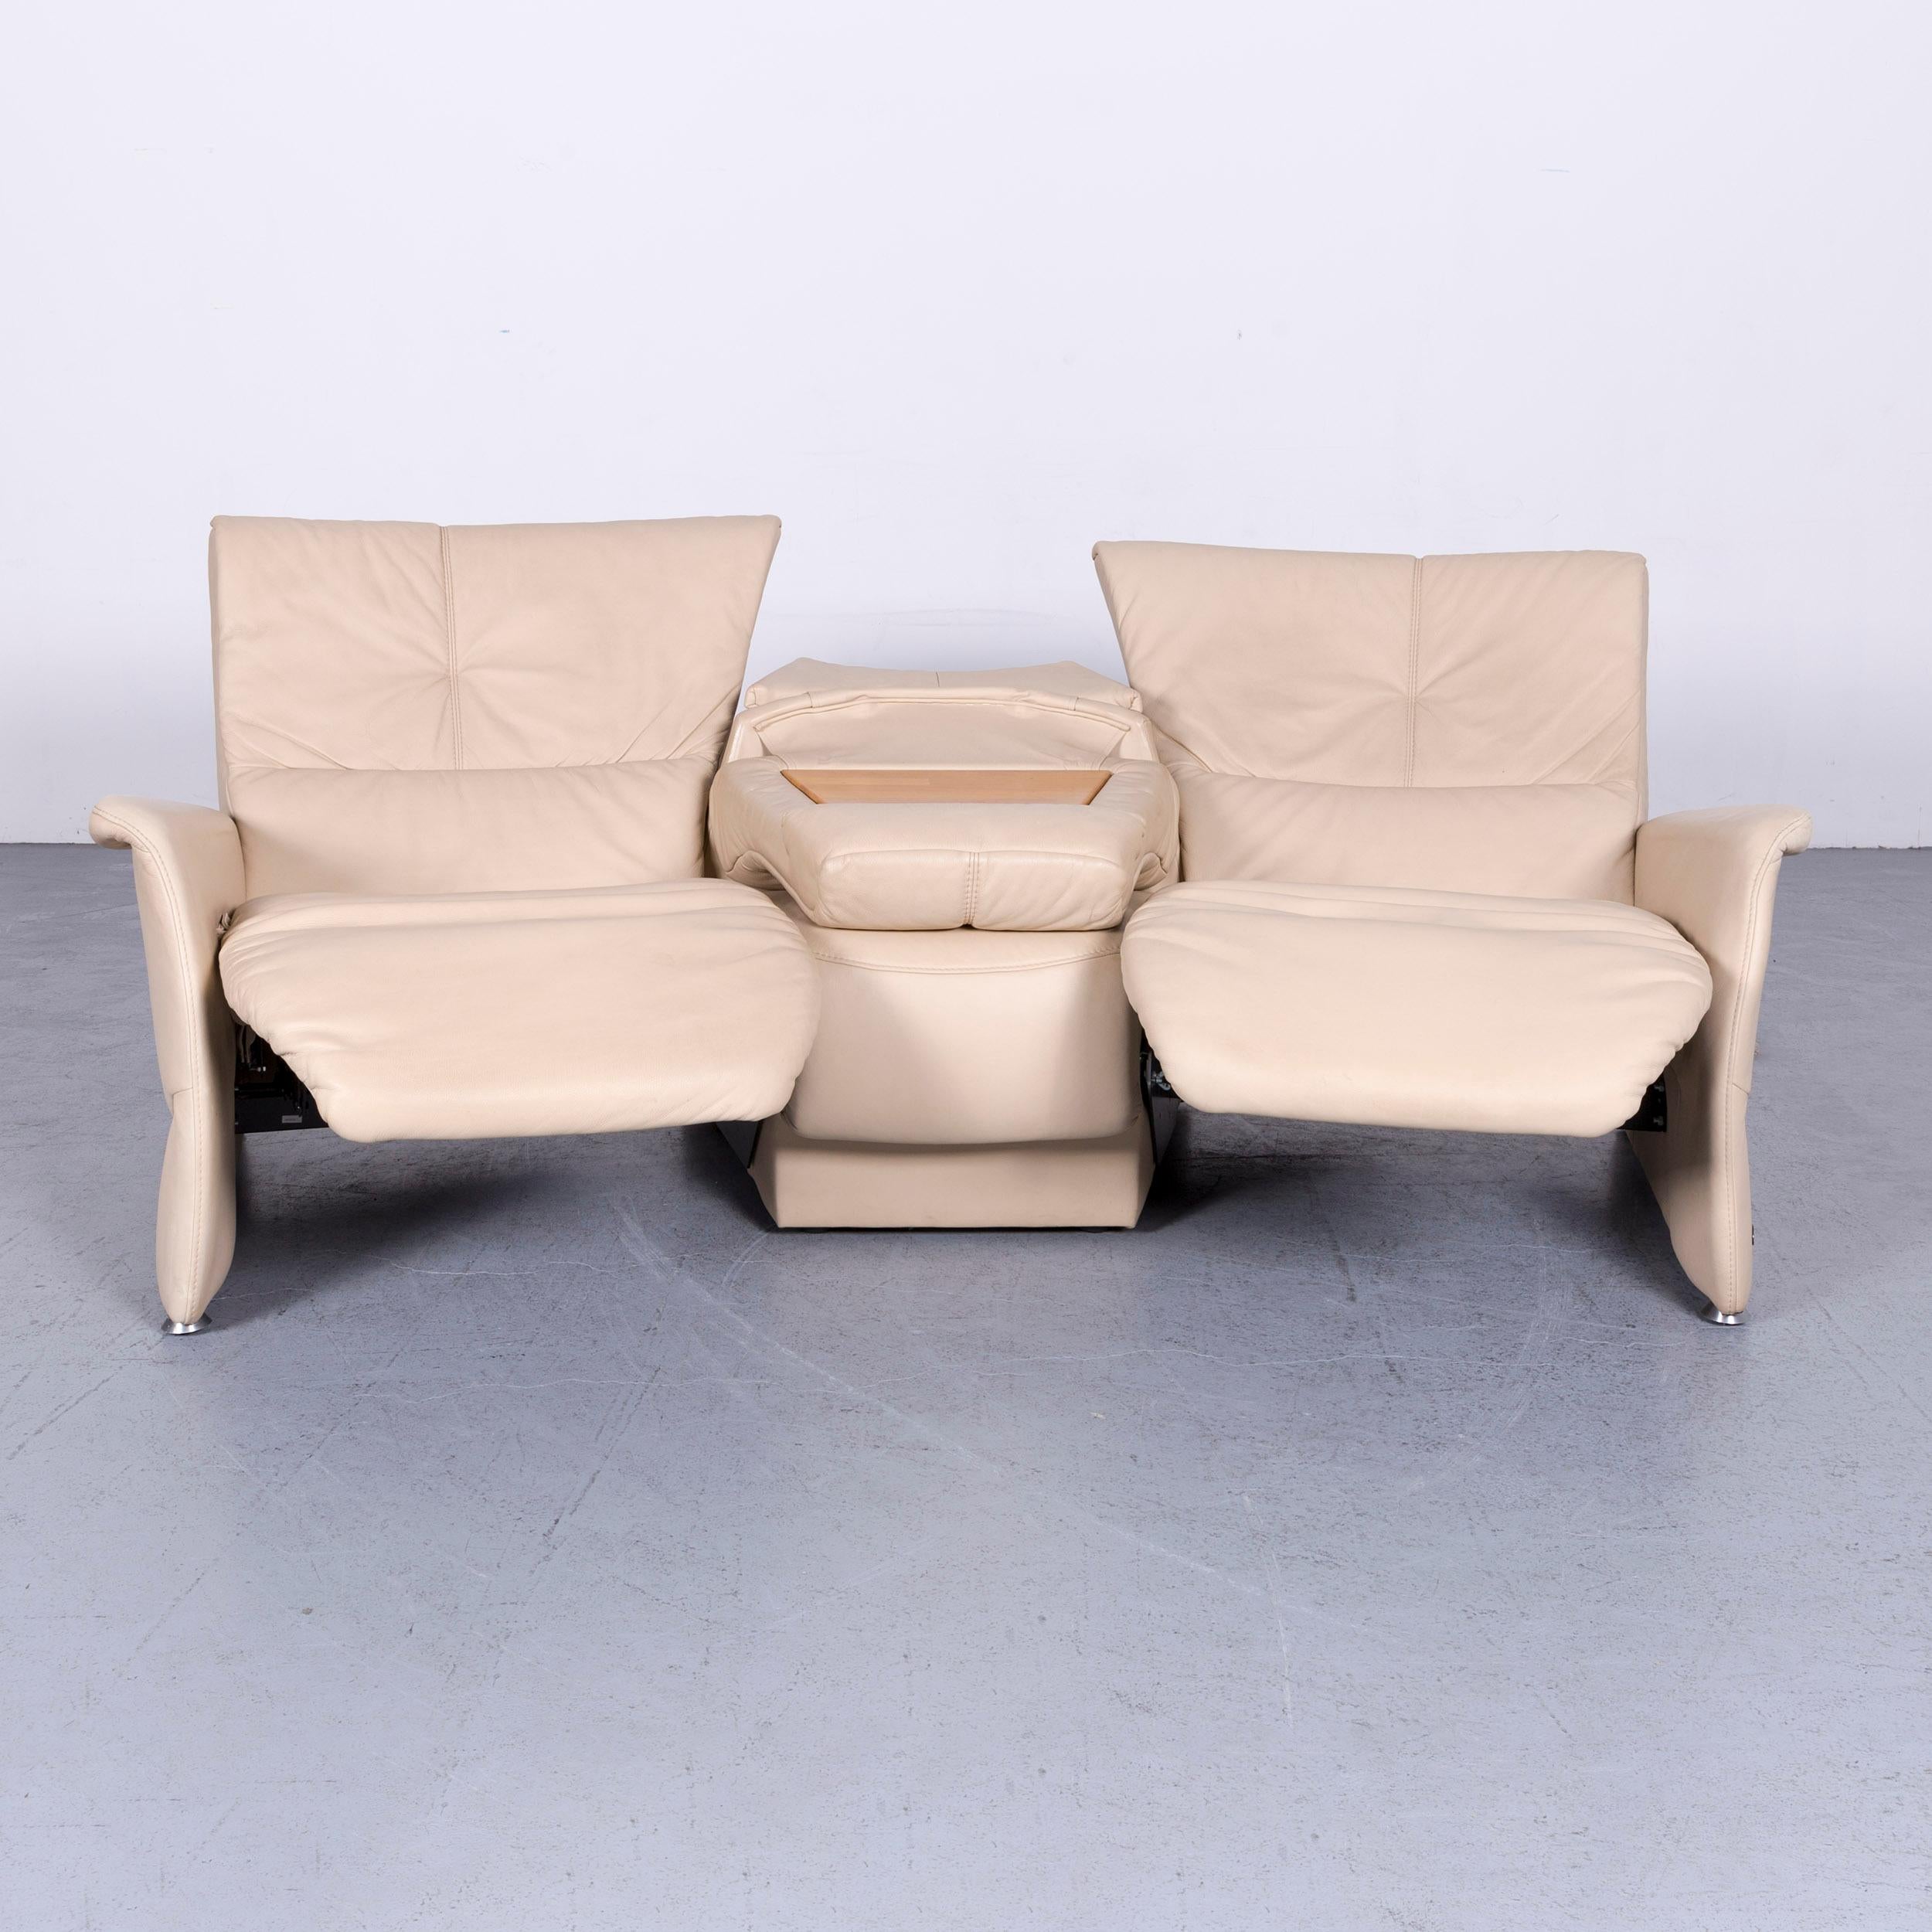 Himolla Designer Sofa Beige Three-Seat Couch Recliner Function In Good Condition For Sale In Cologne, DE